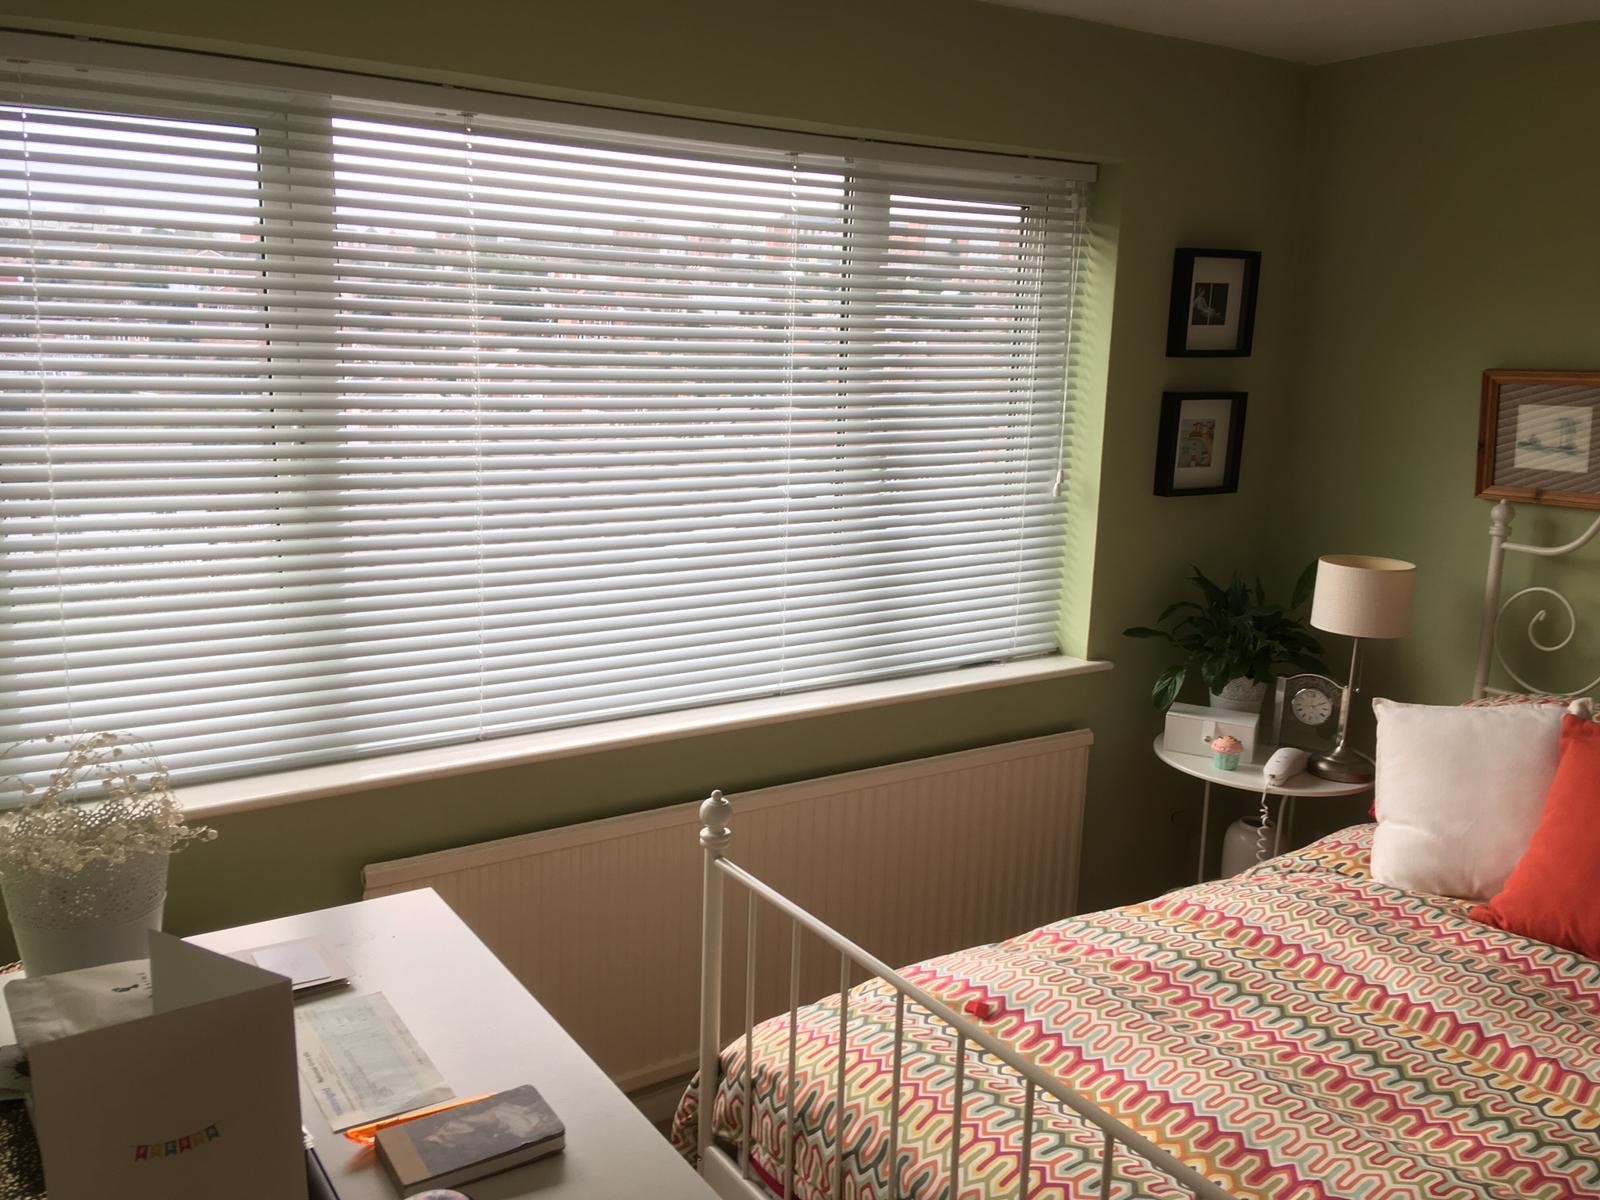 Suppliers of Perfect Fit Aluminium Blinds Options UK